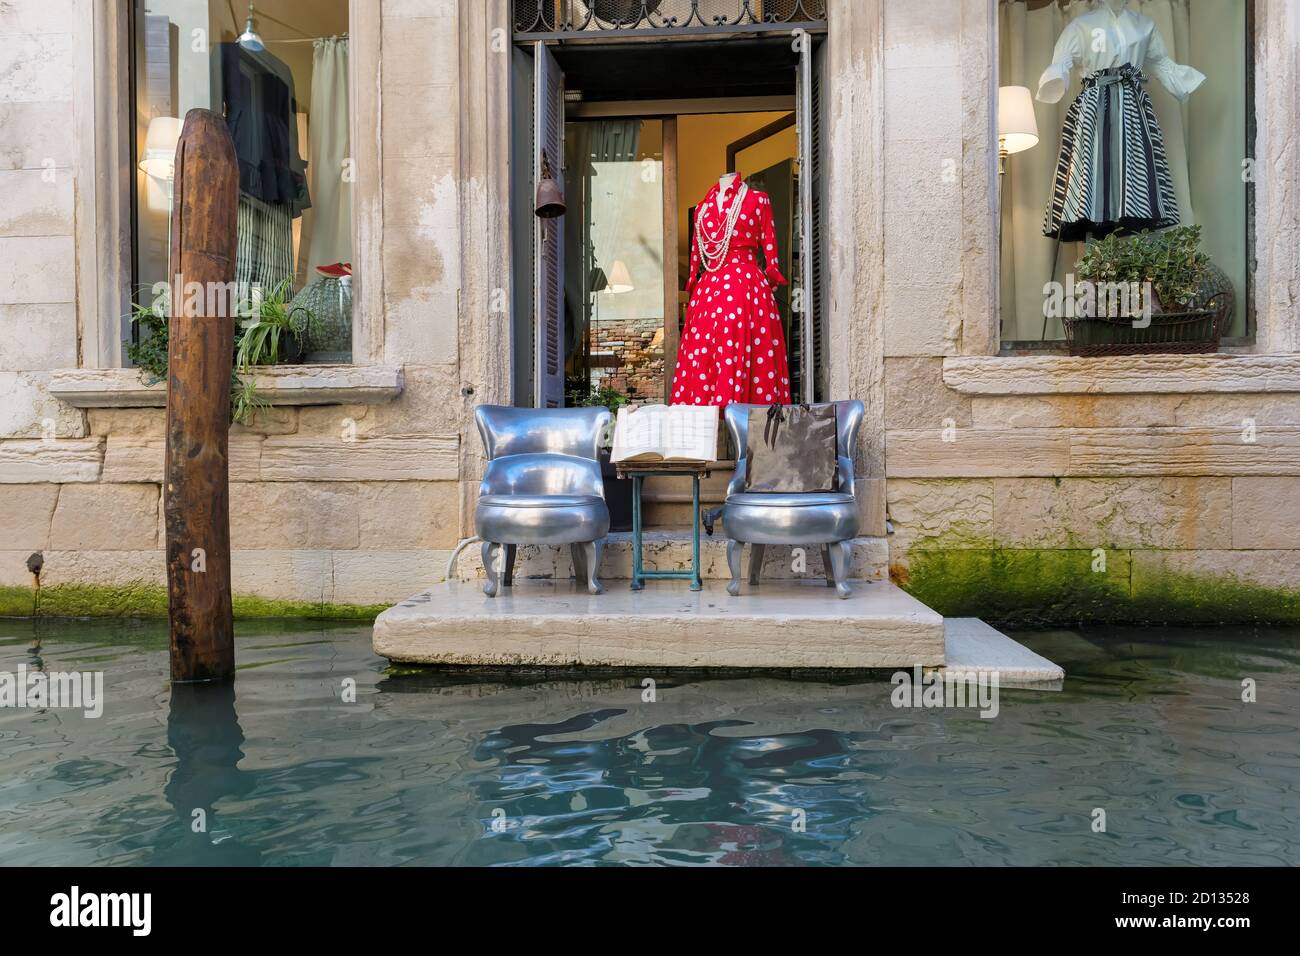 Venice boutique store on Venice canal, Italy Stock Photo